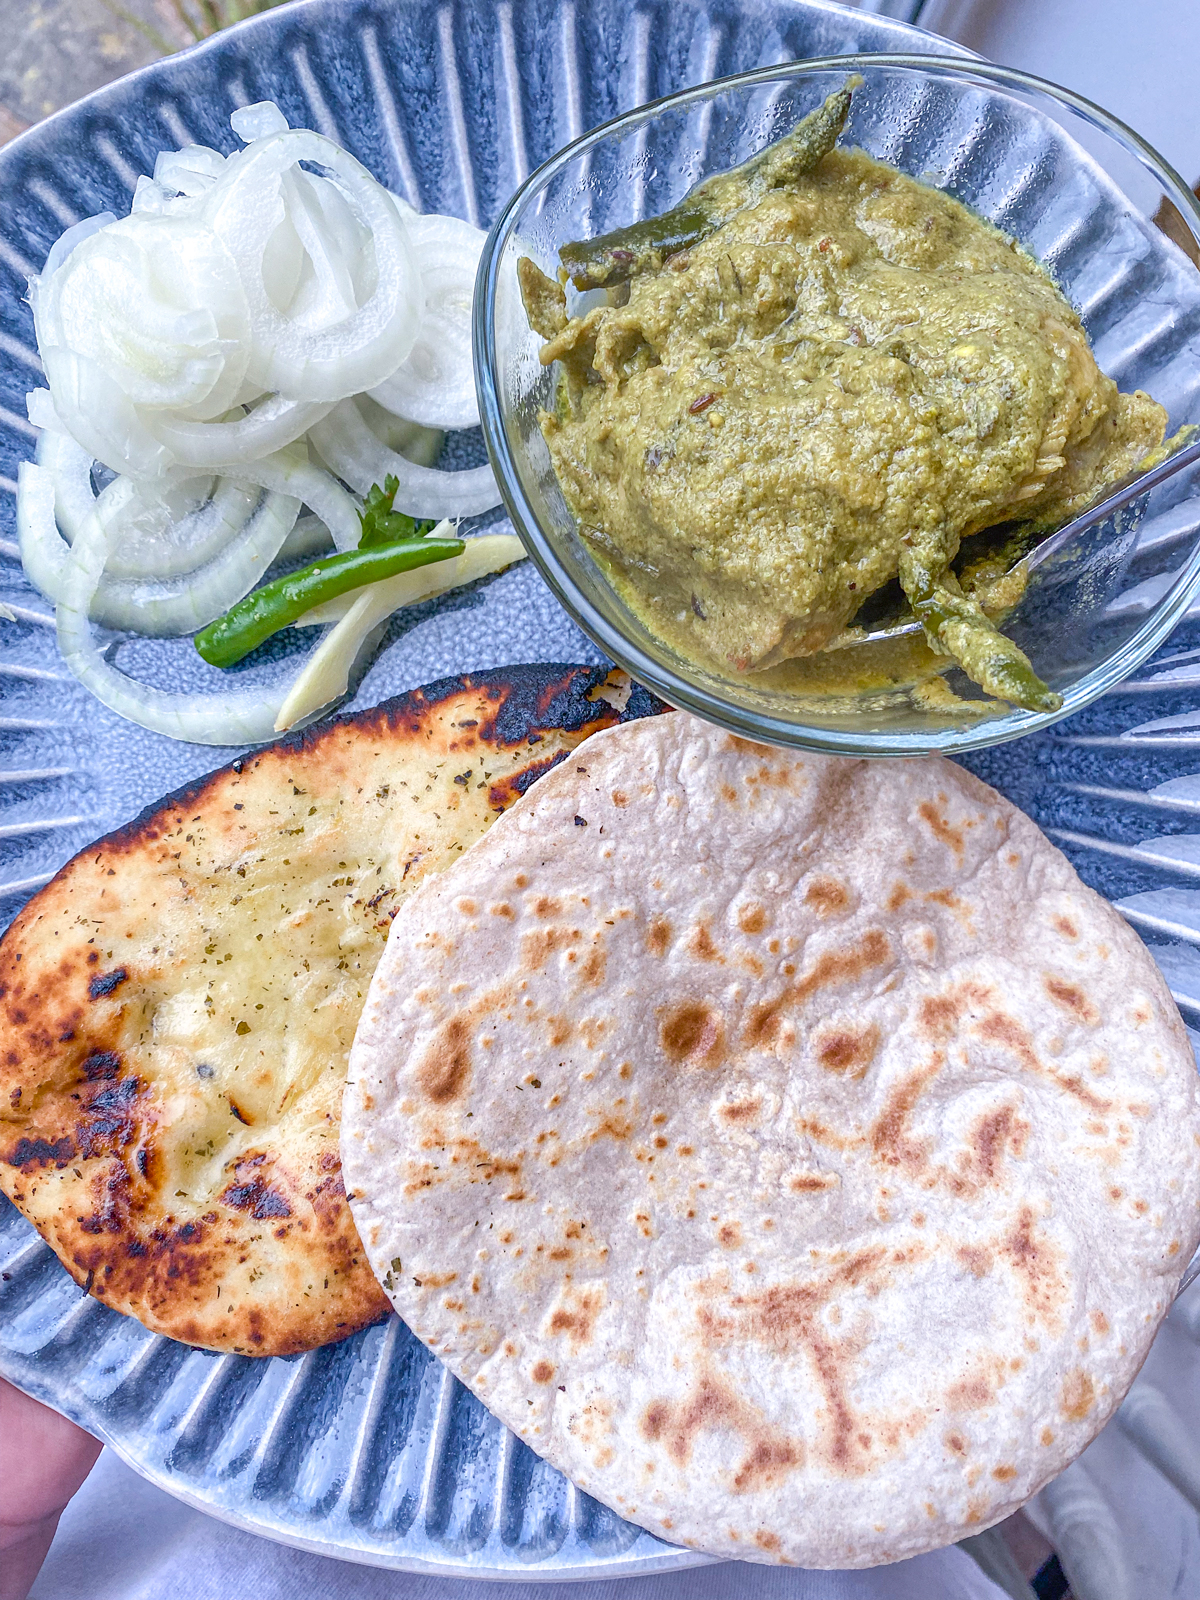 Green chilli chicken Roti naan onion salad served on a blue ribbed plate